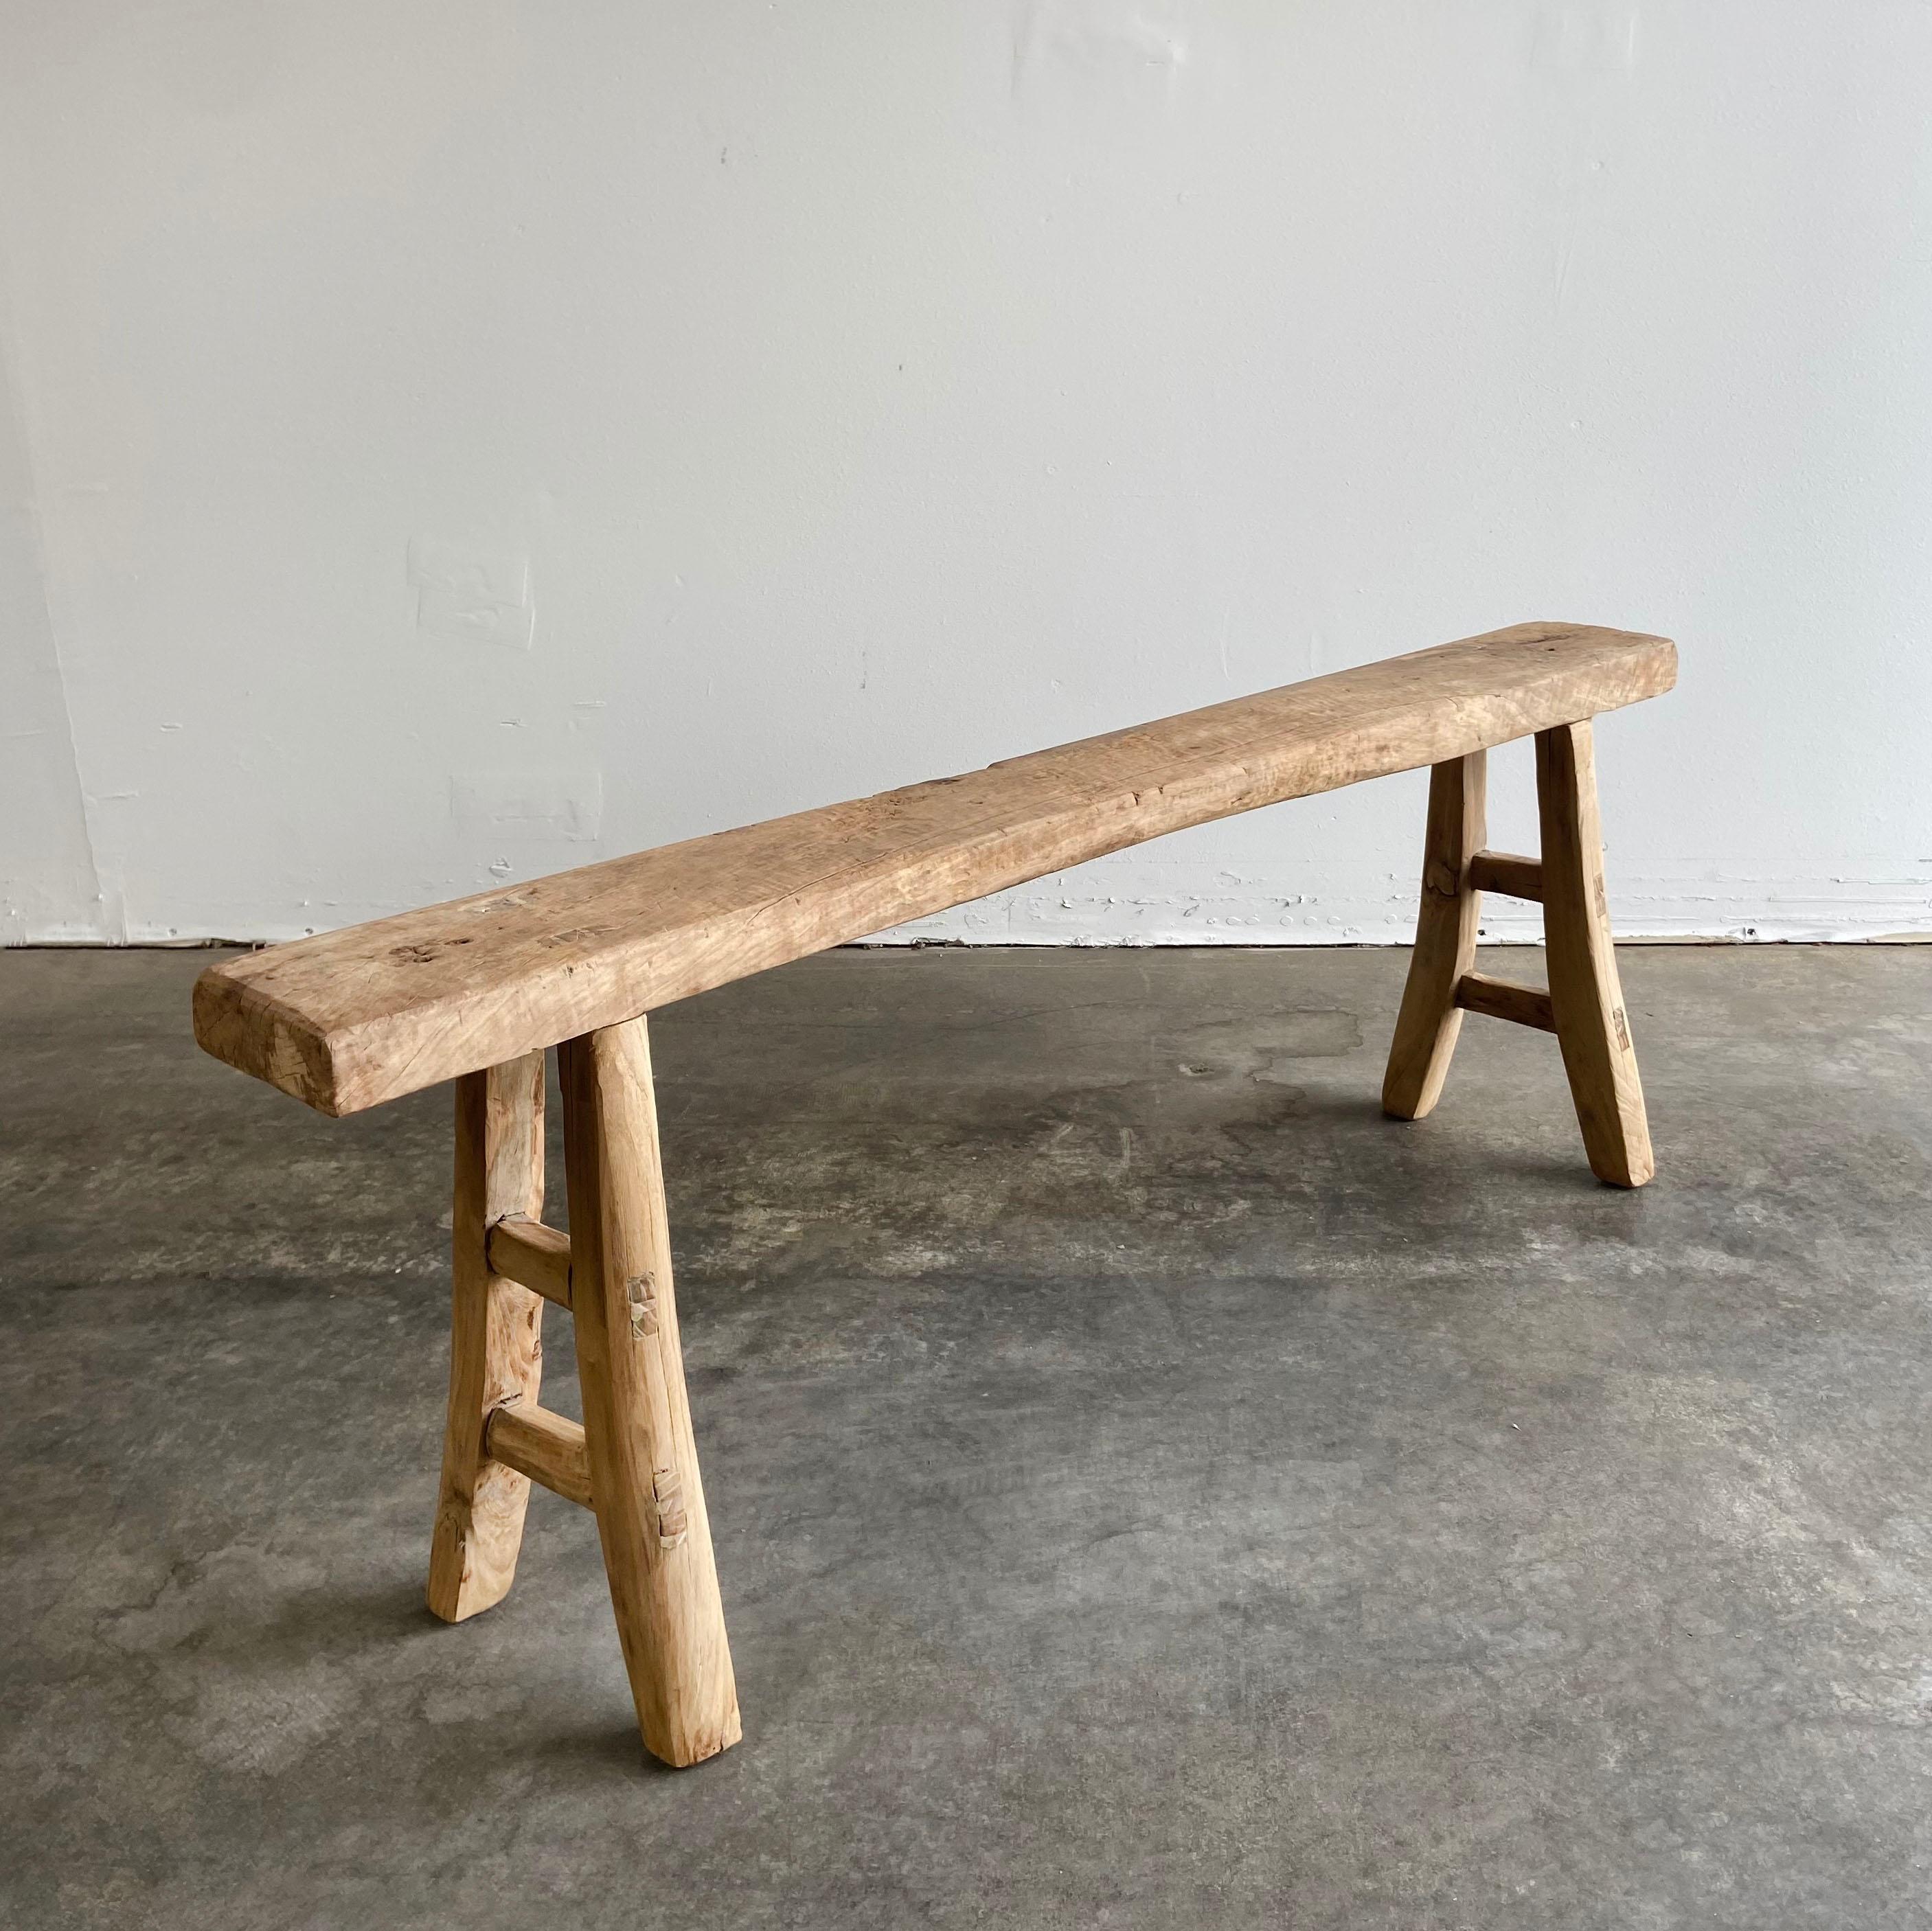 Vintage antique elm wood skinny bench.
These are the real vintage antique elm wood benches! Beautiful antique patina, with weathering and age, these are solid and sturdy ready for daily use, use as a table behind a sofa, stool, coffee table, they